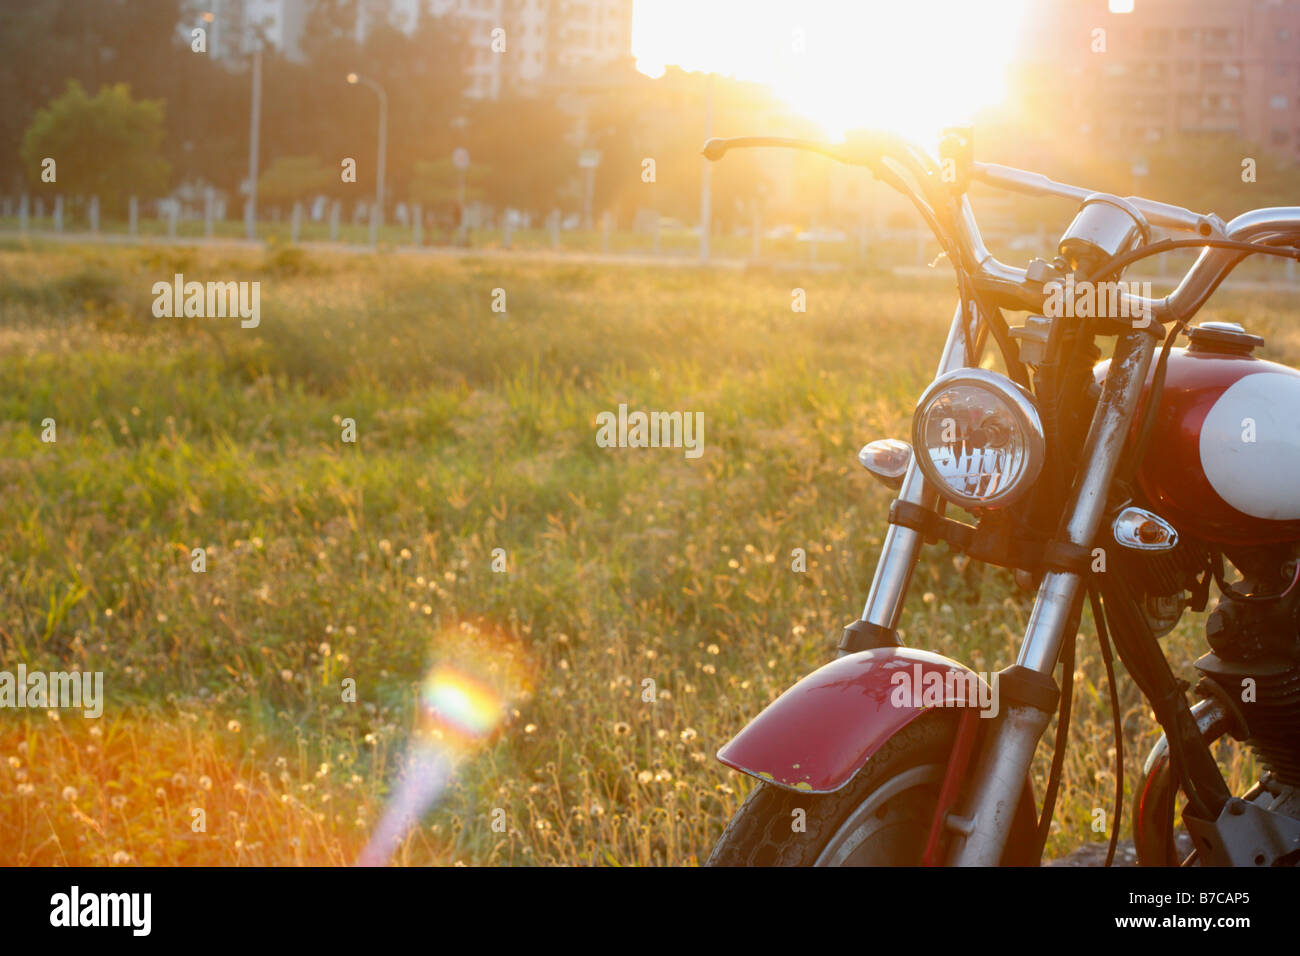 The front of a motorcycle outside the city. Stock Photo